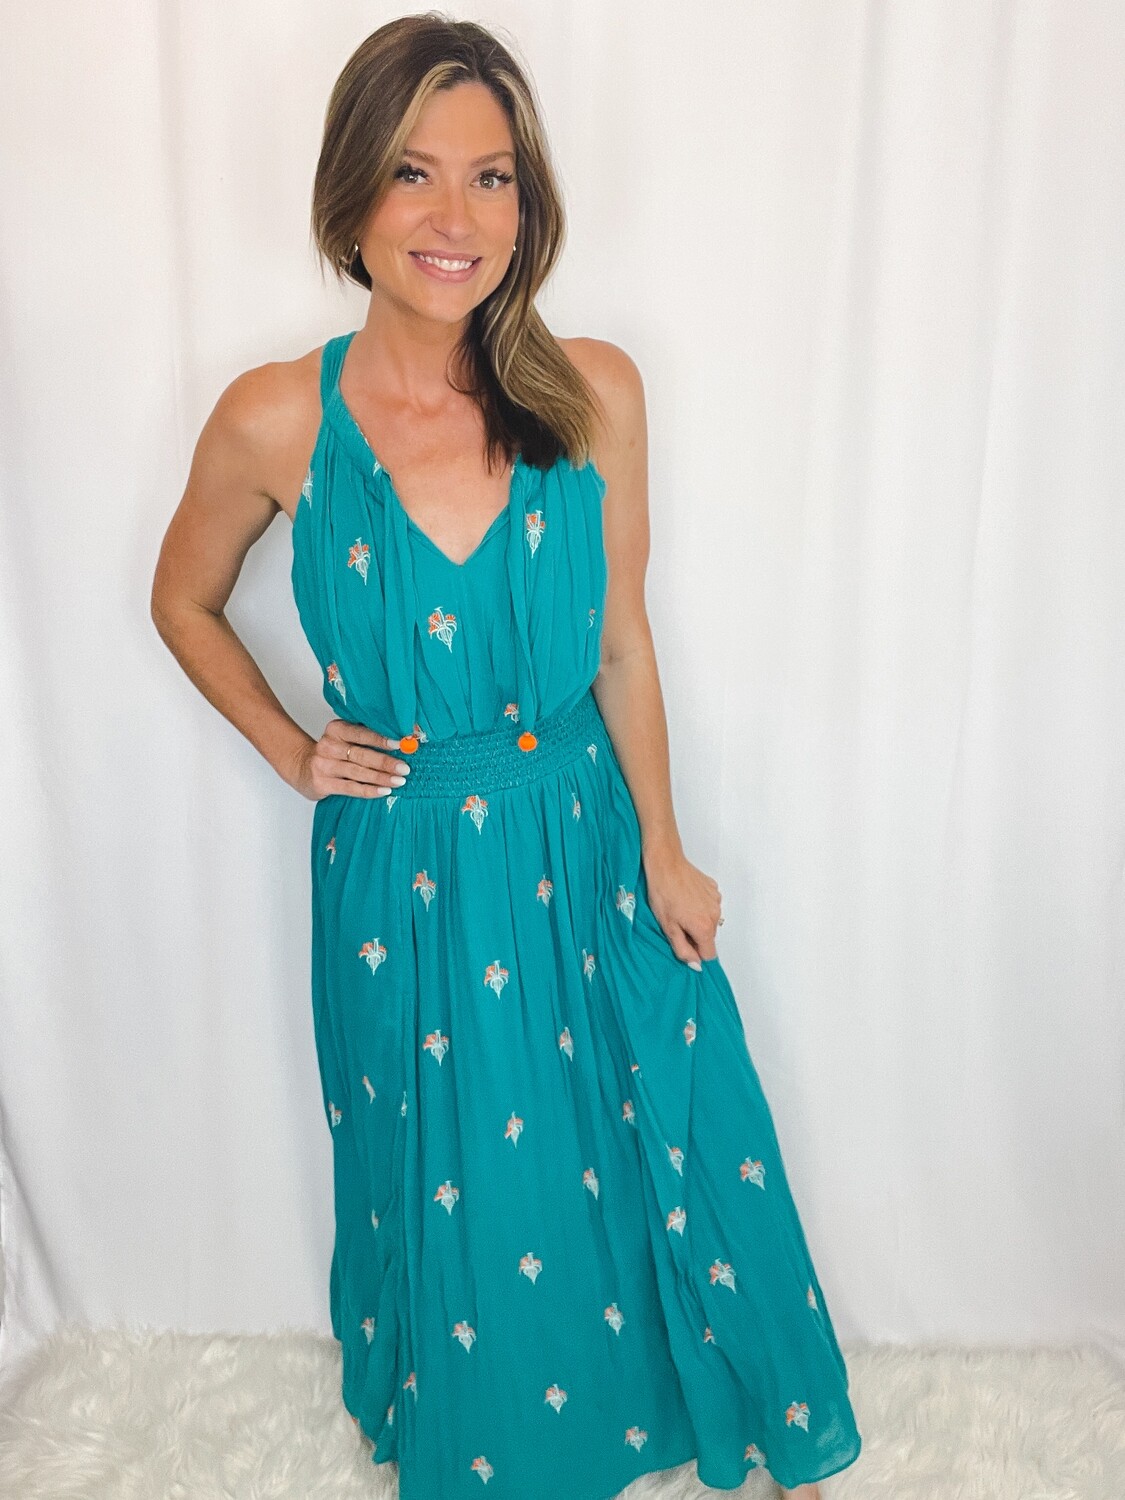 Floreat Teal Maxi with Peach & Cream Accent - Size 4